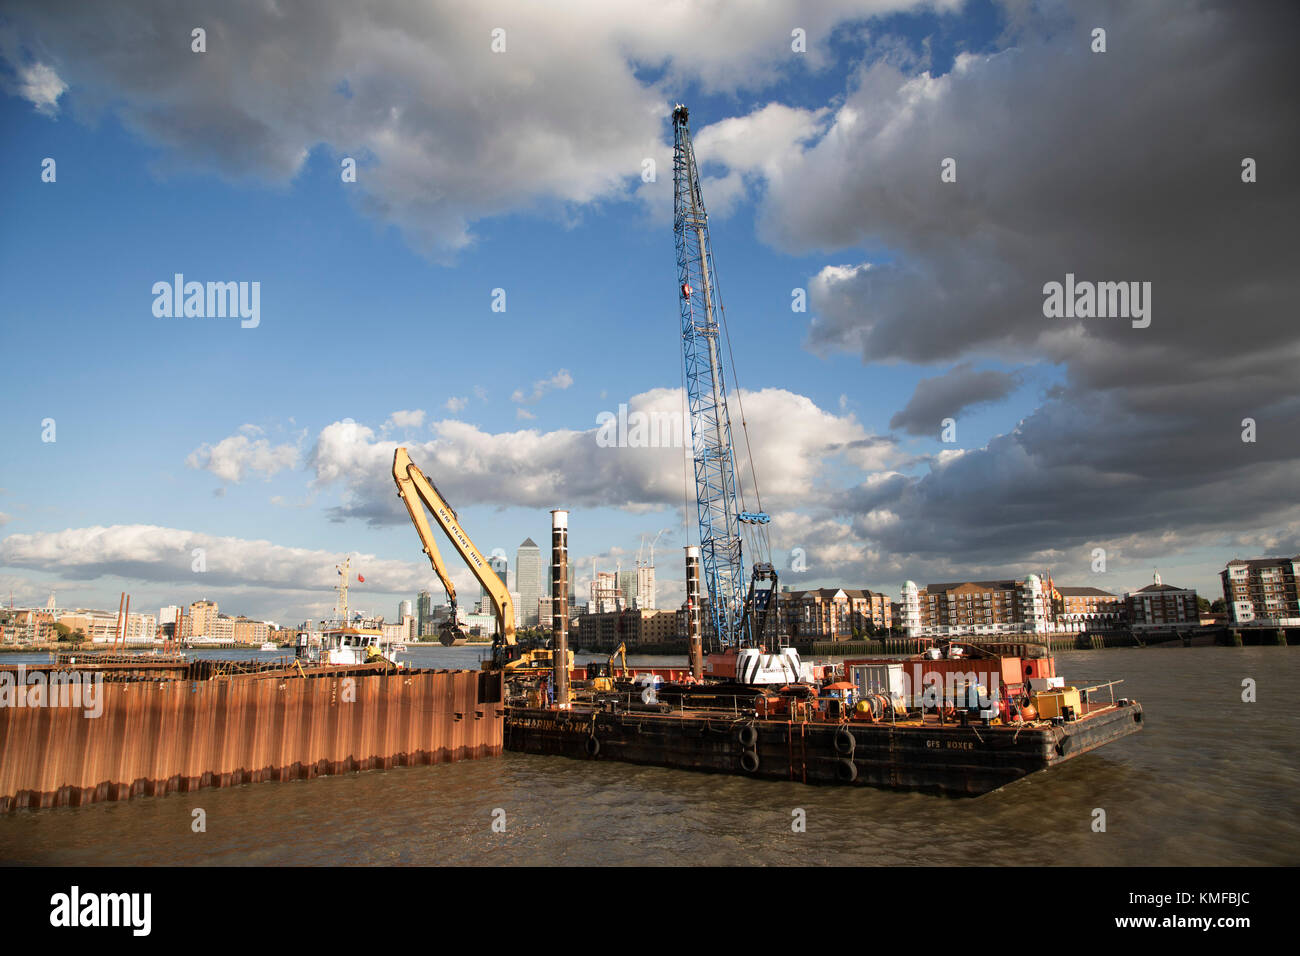 Construction work underway on the Thames Tideway Tunnel or Super Sewer on the River Thames near Wapping in London, England, United Kingdom. The Thames Tideway Tunnel is an under-construction civil engineering project 25 km tunnel running mostly under the tidal section of the River Thames through central London, which will provide capture, storage and conveyance of almost all the combined raw sewage and rainwater discharges that currently overflow into the river. Stock Photo